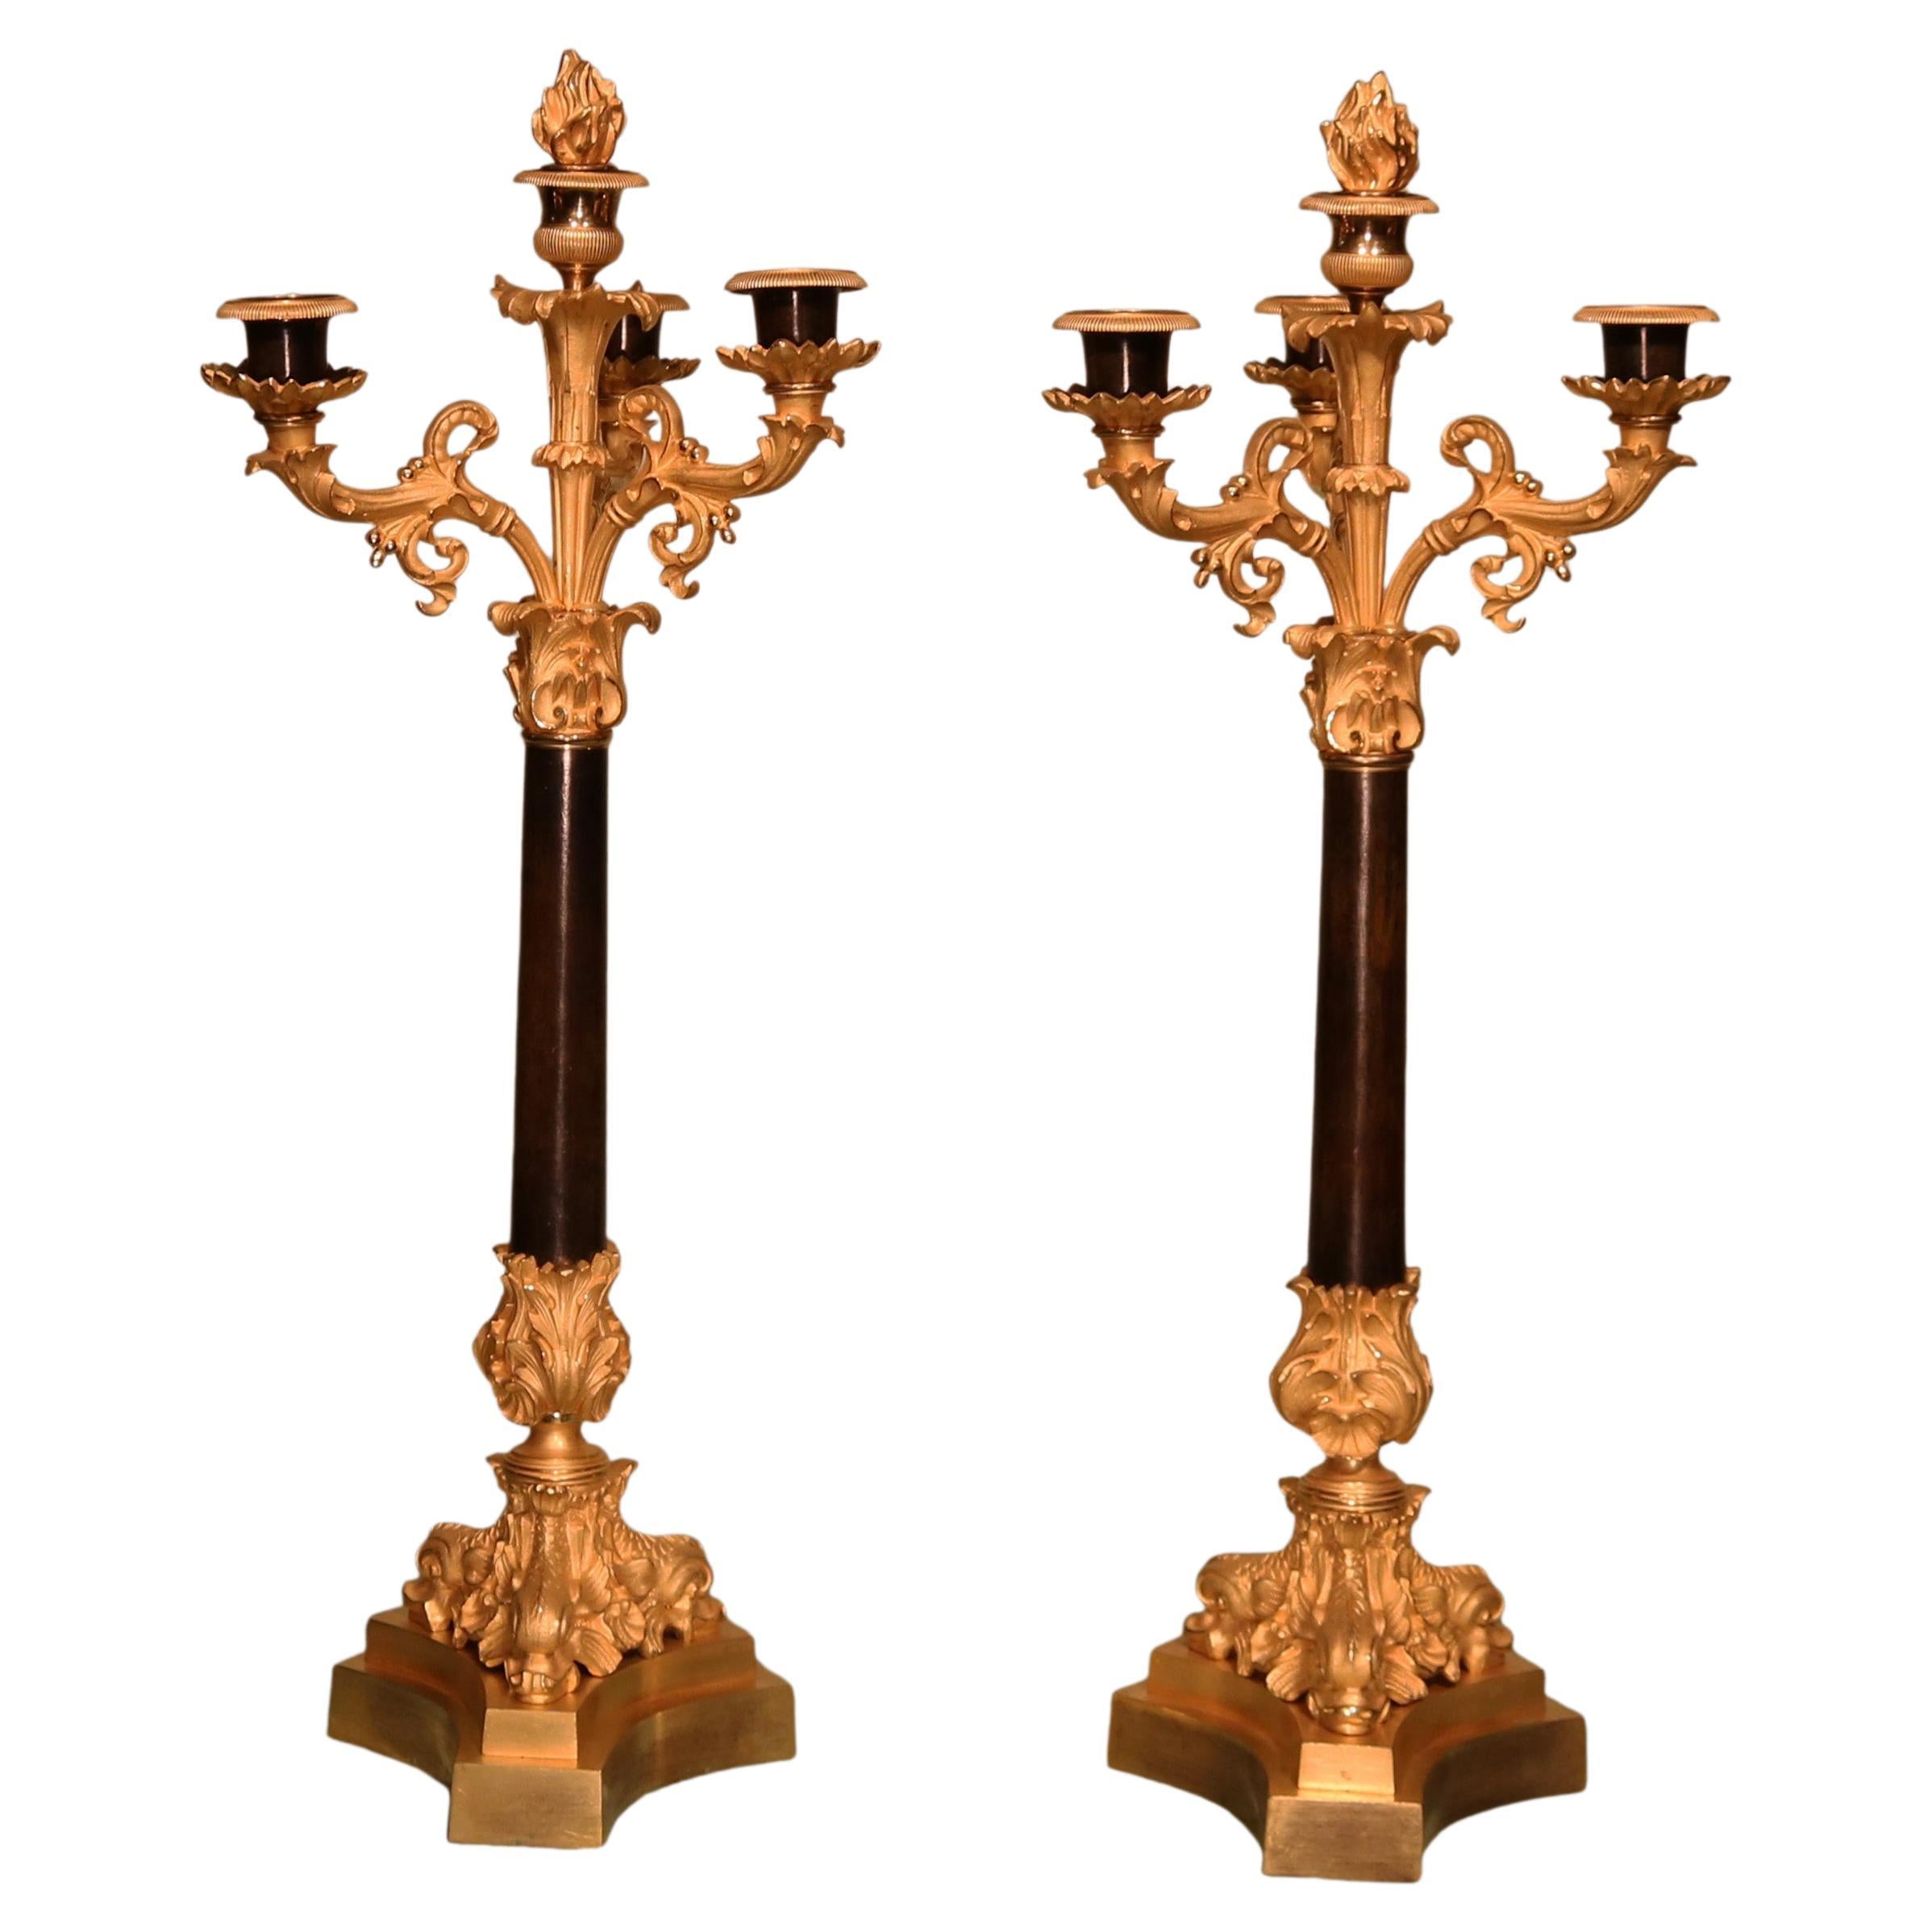 A fine pair of 19th century bronze and ormolu 4 light candelabra For Sale